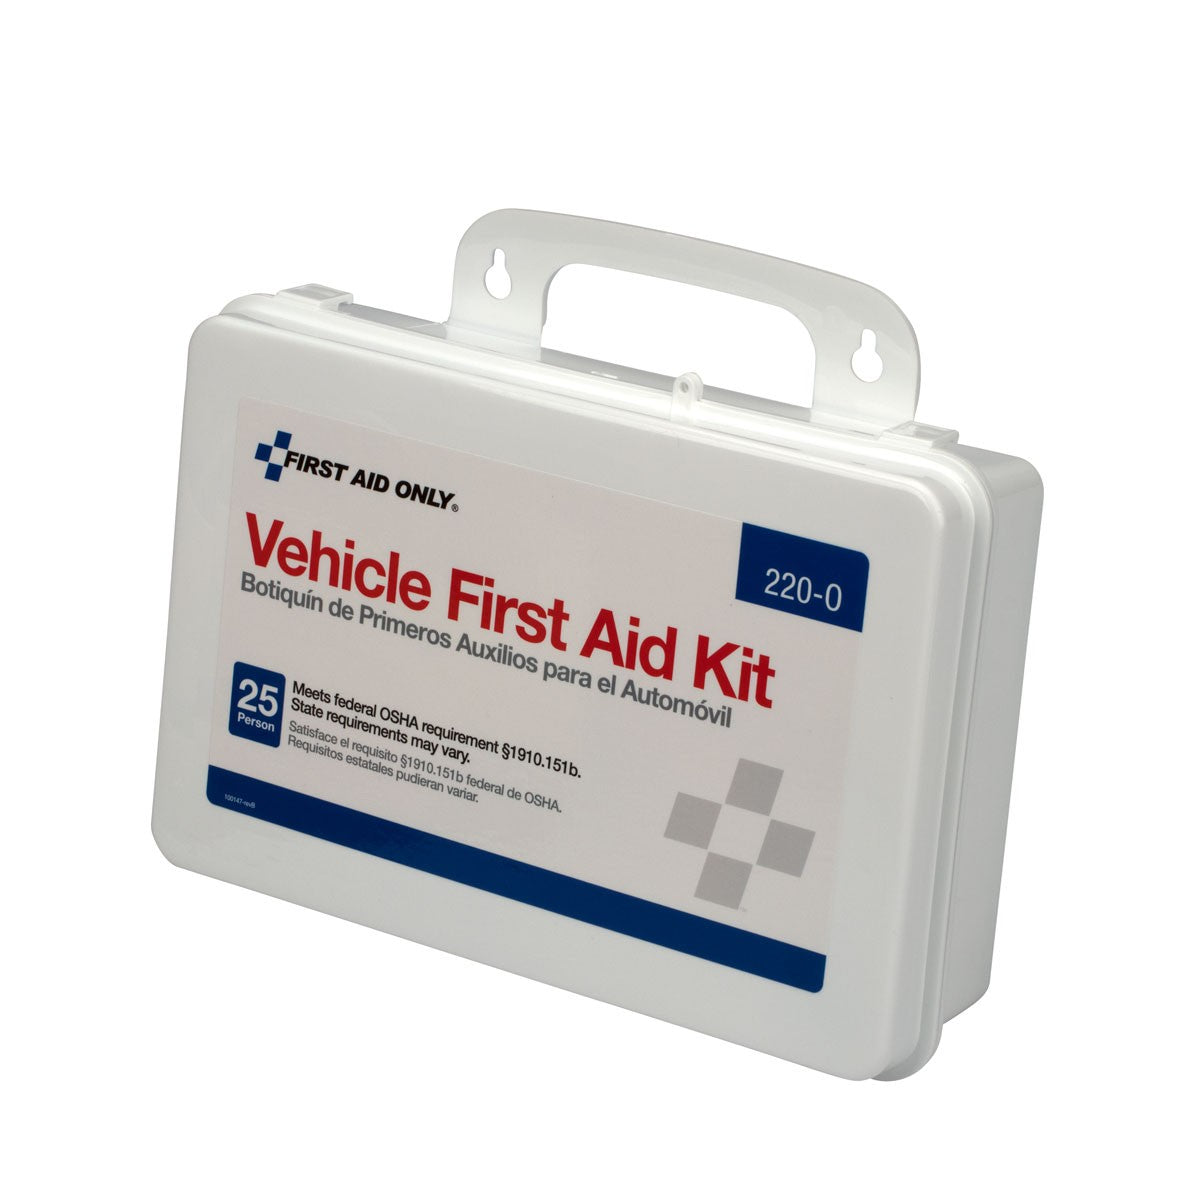 25 Person Vehicle First Aid Kit, Plastic Case - W-220-O